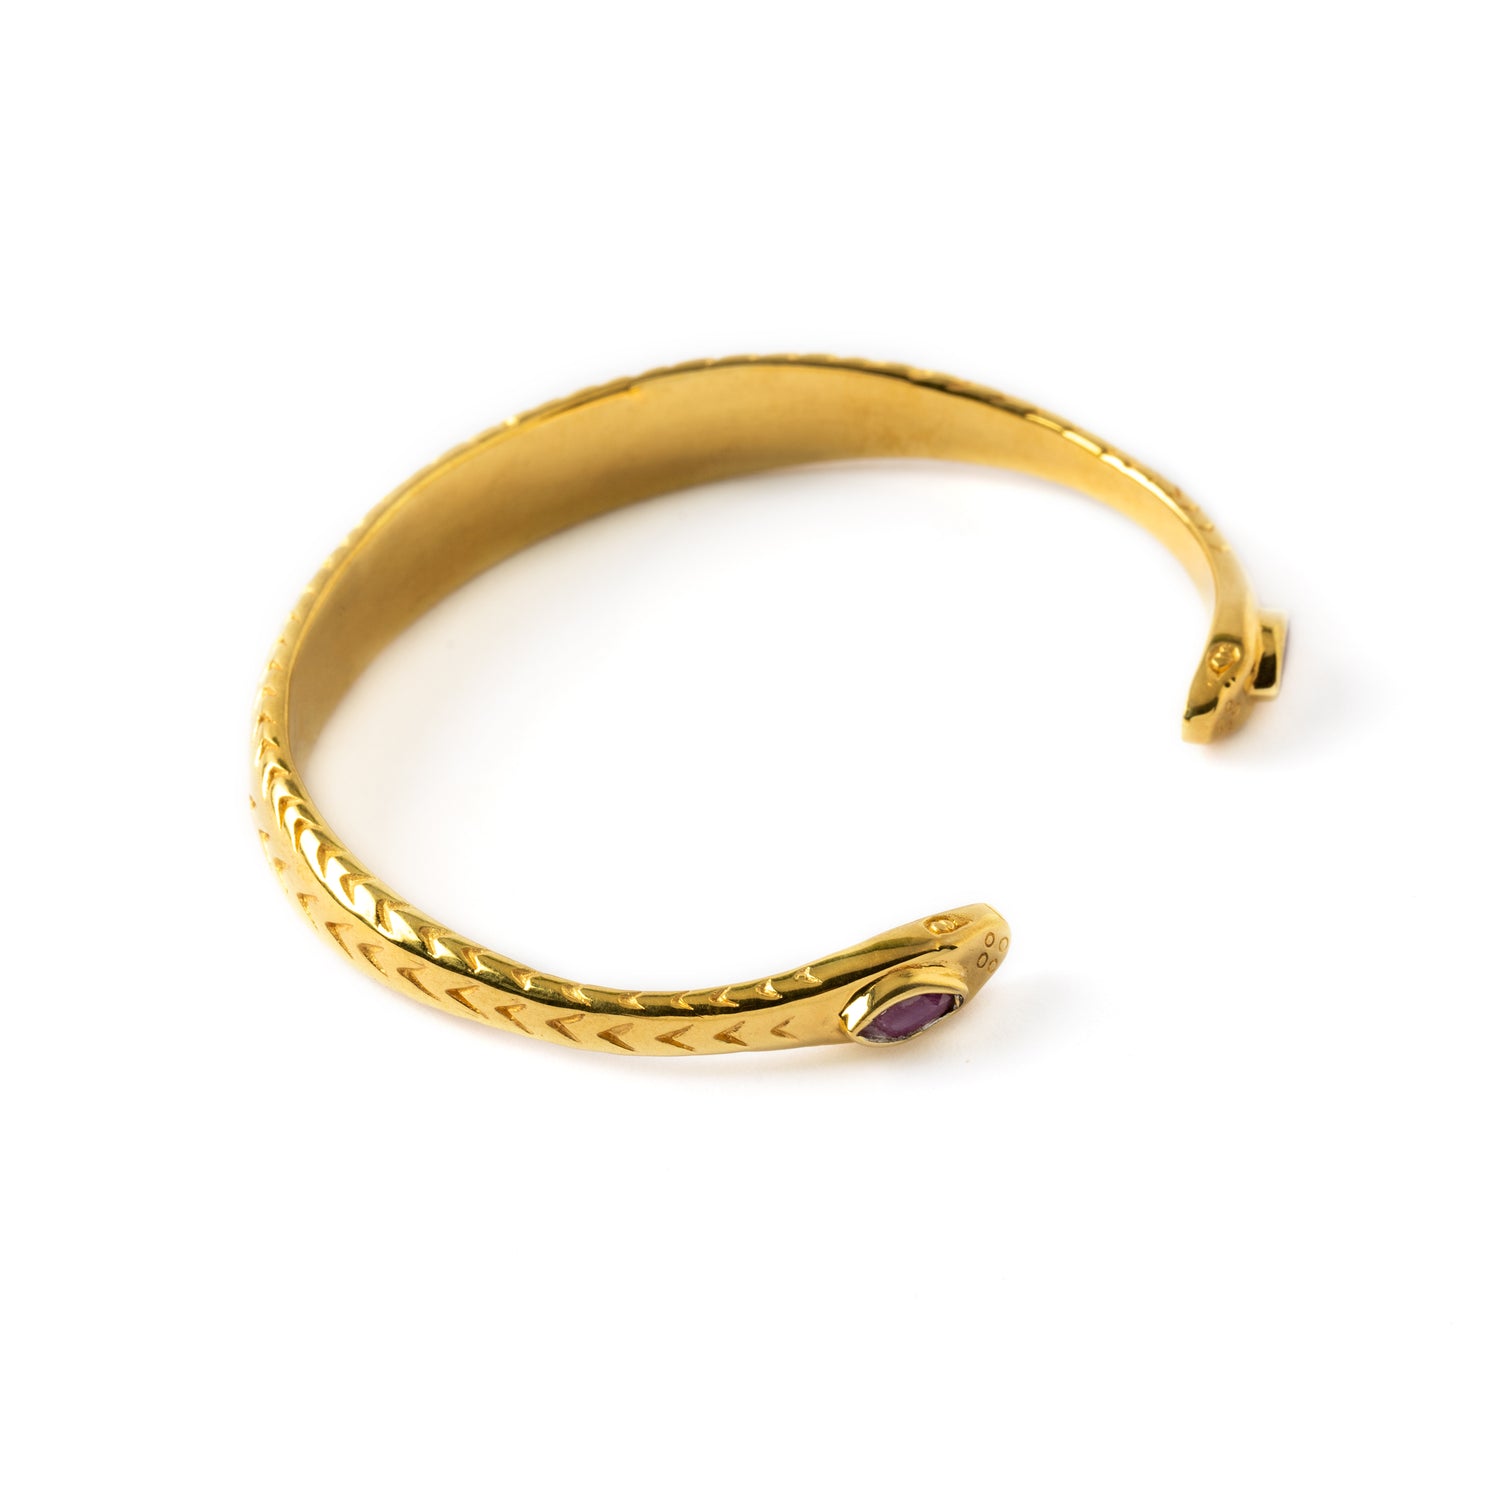 Naga Gold Cuff with Ruby right side view